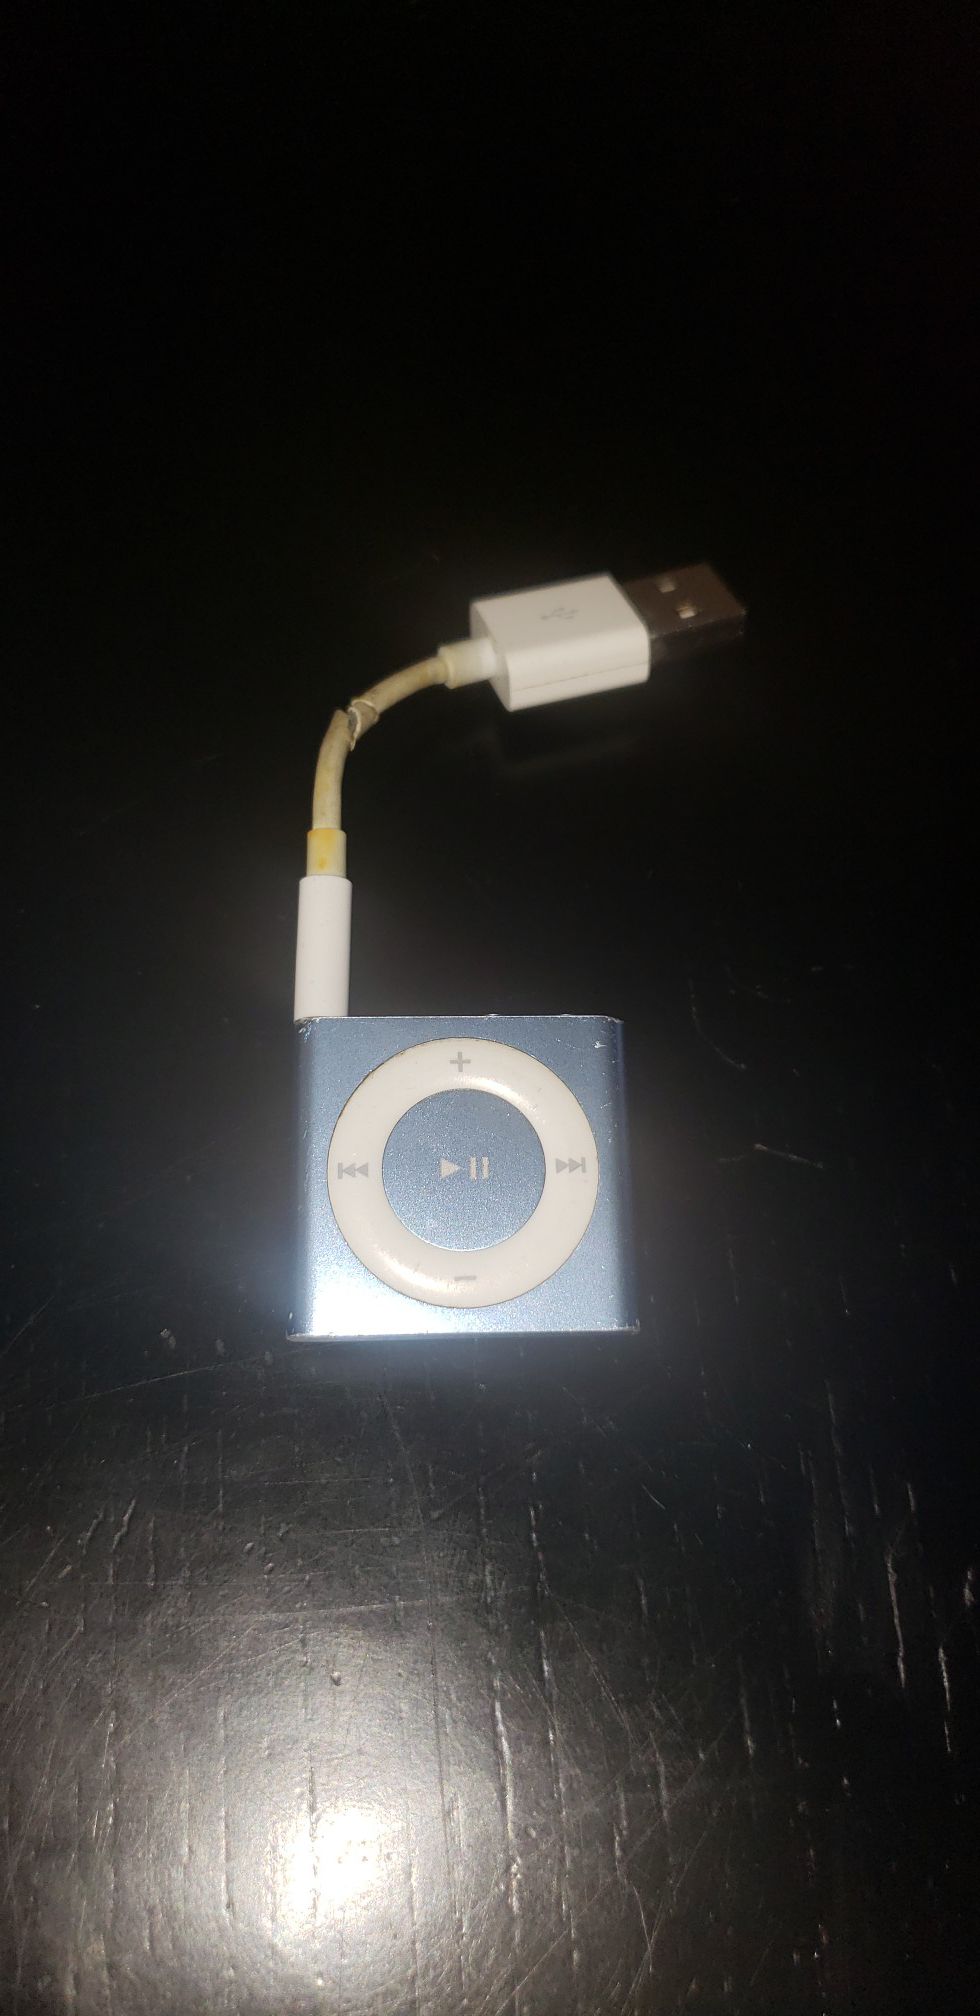 Ipod shuffle 4th generation w/ charger